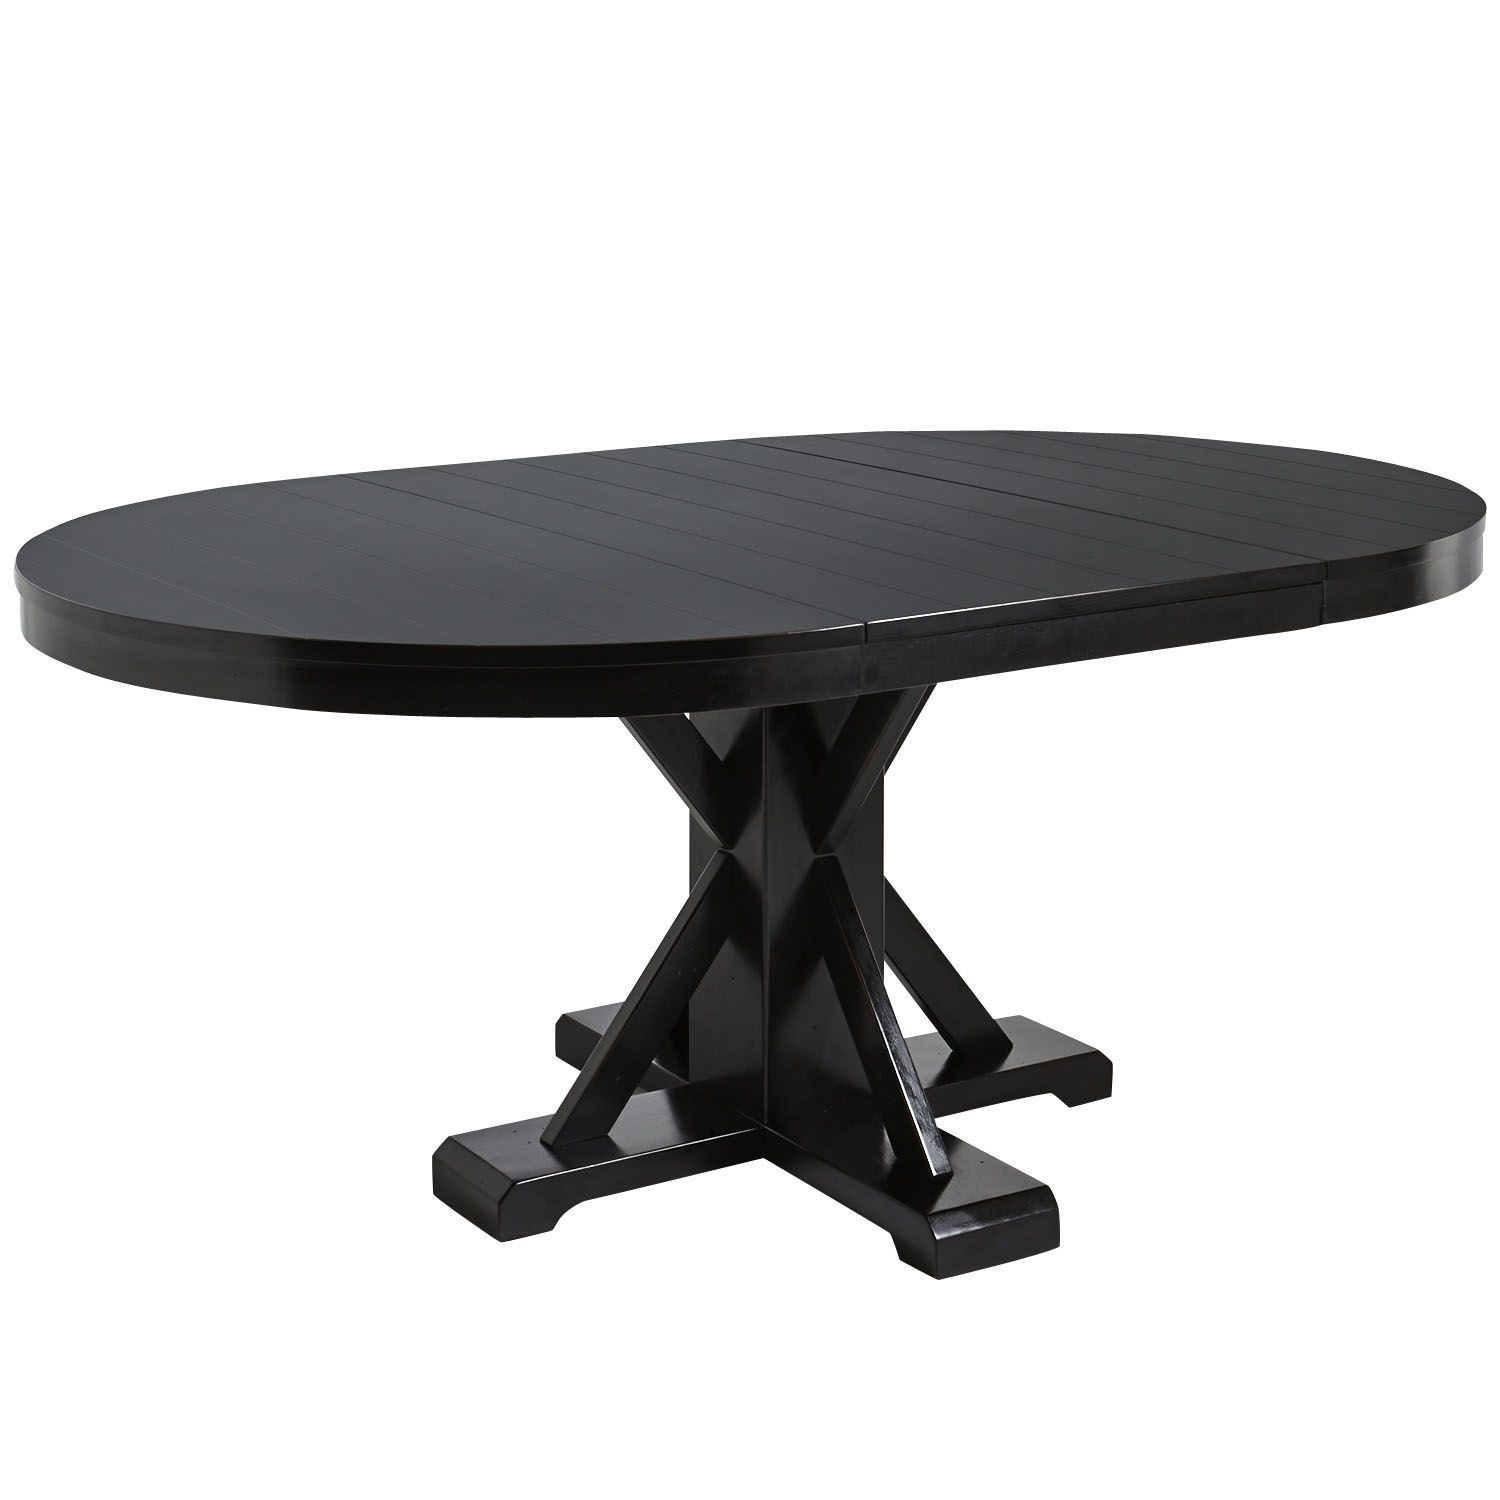 Nolan Extension Round Dining Table – Rubbed Black | Pier 1 In Recent Nolan Round Pedestal Dining Tables (Photo 10 of 25)